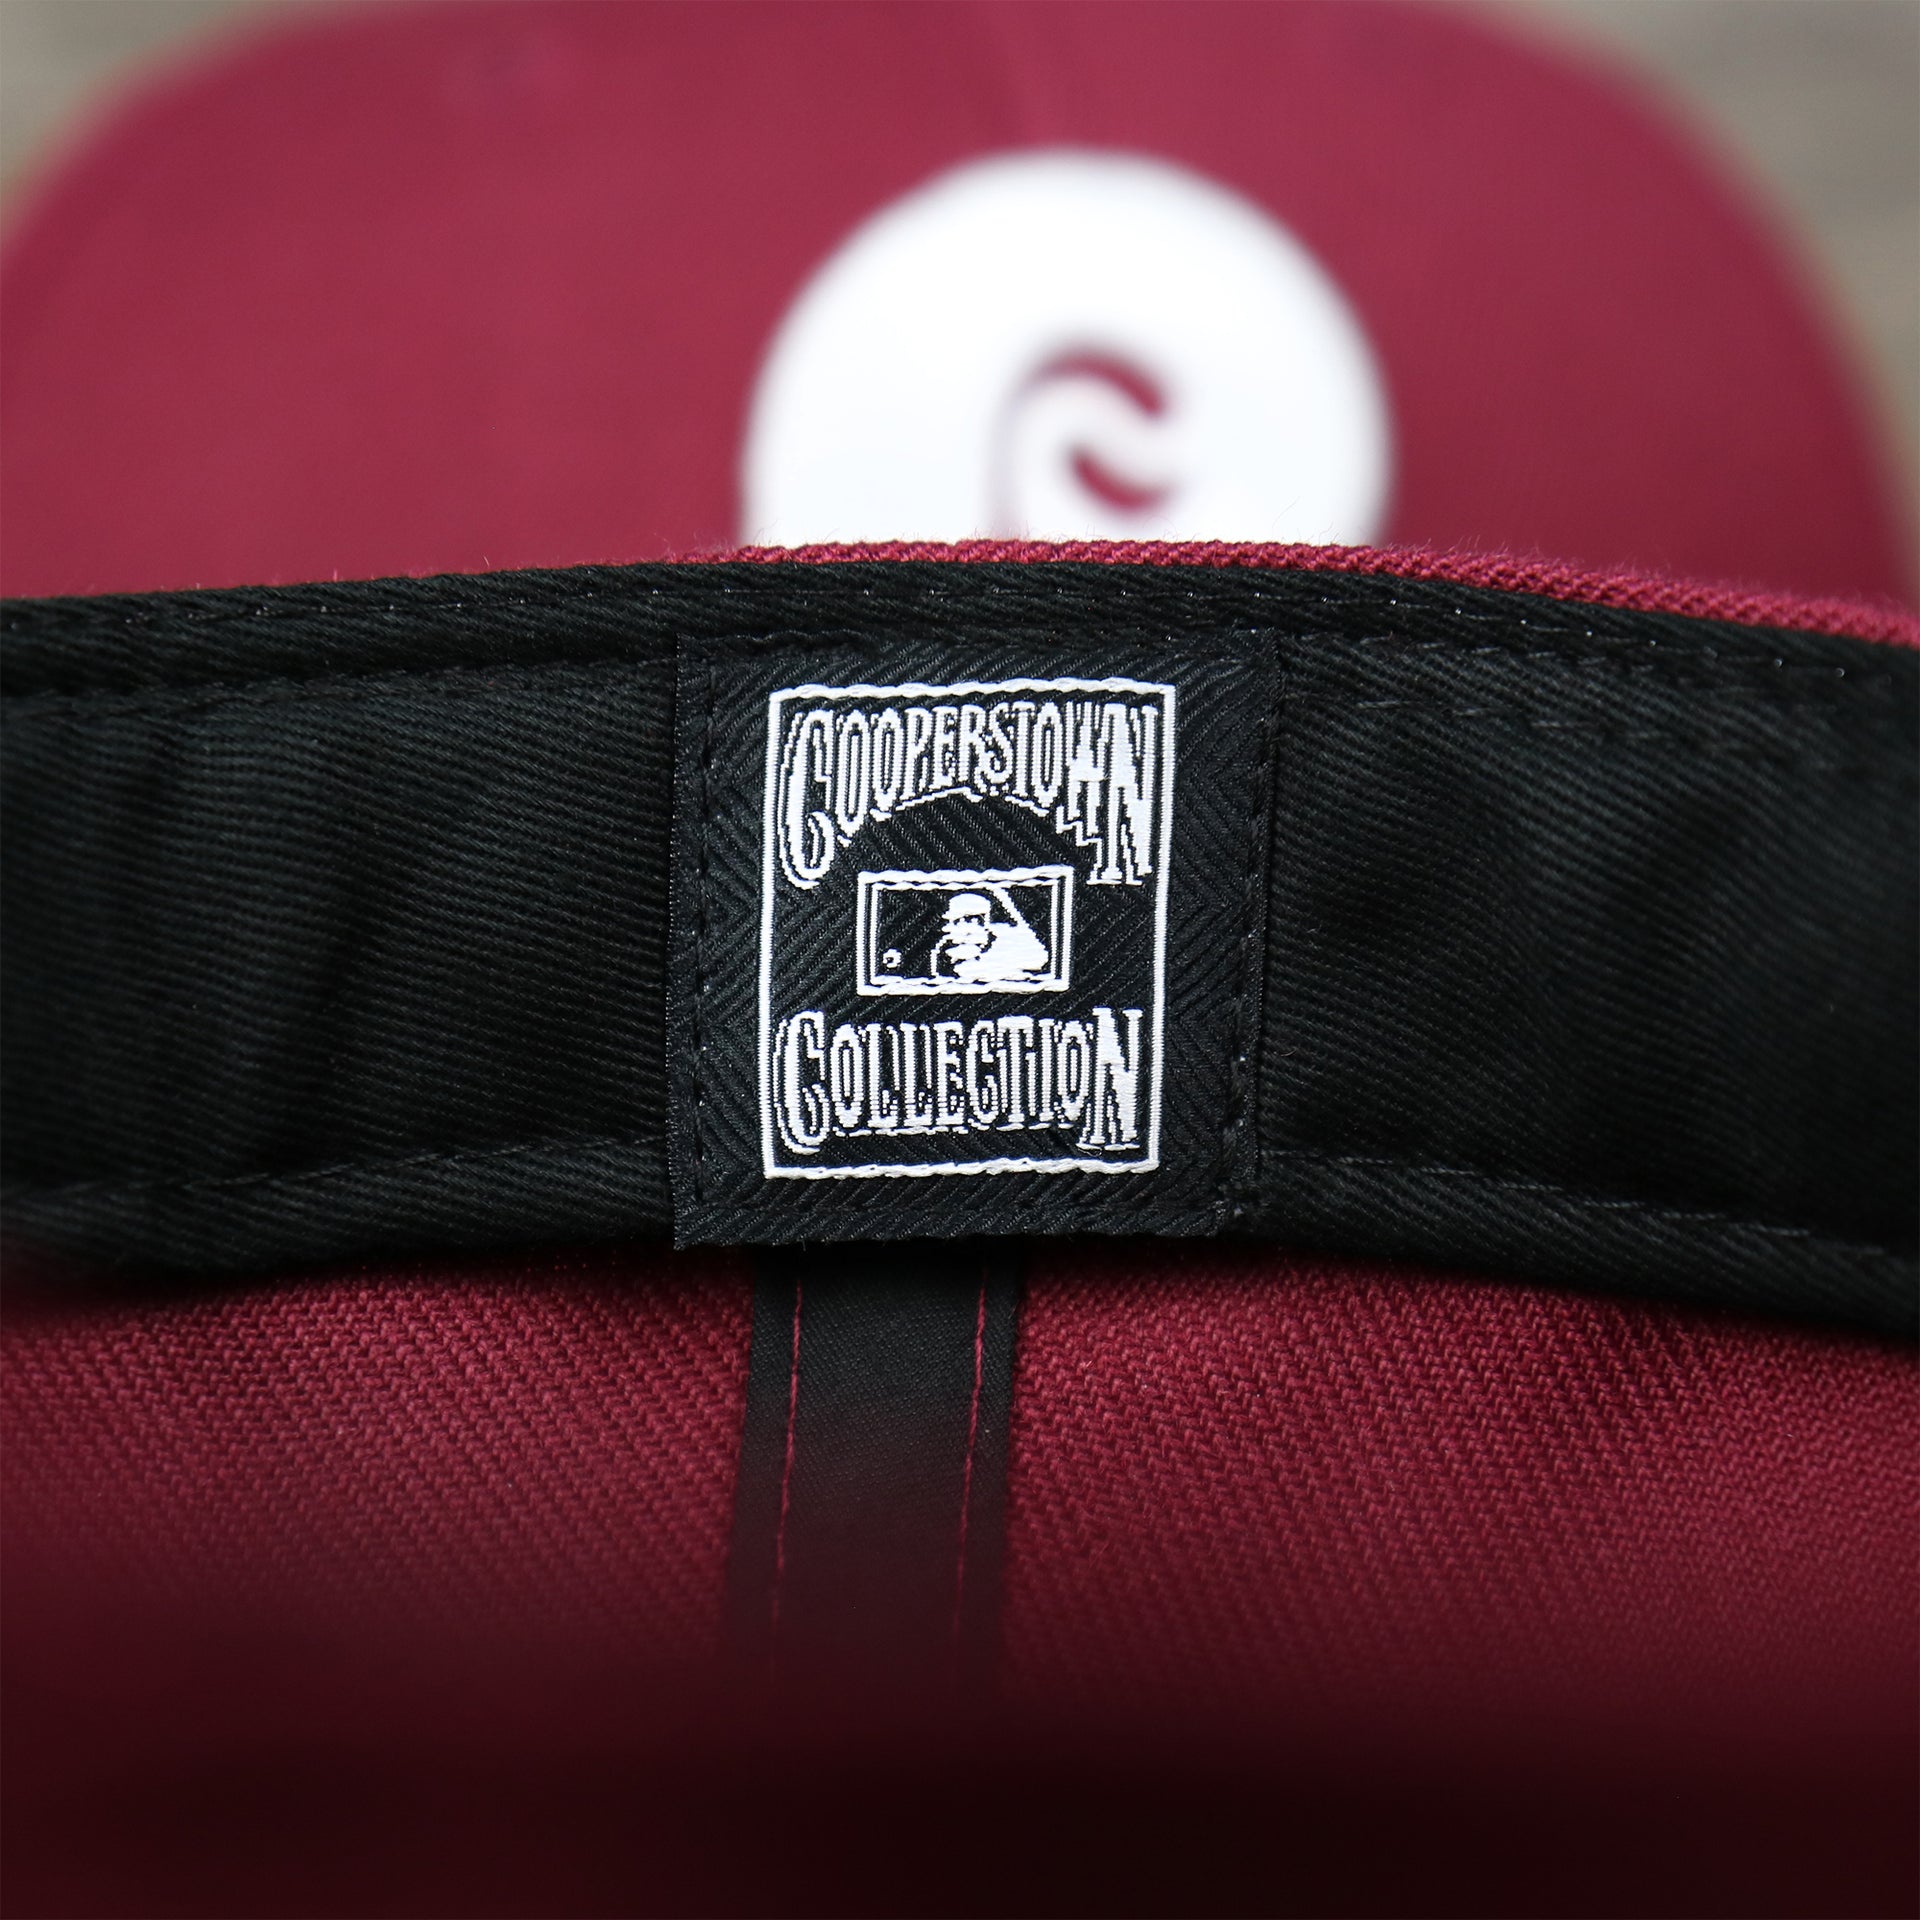 The Cooperstown Collection Tag on the Cooperstown Philadelphia Phillies Retro Phillies Logo Gray Bottom Dad Hat | Maroon Dad Hat